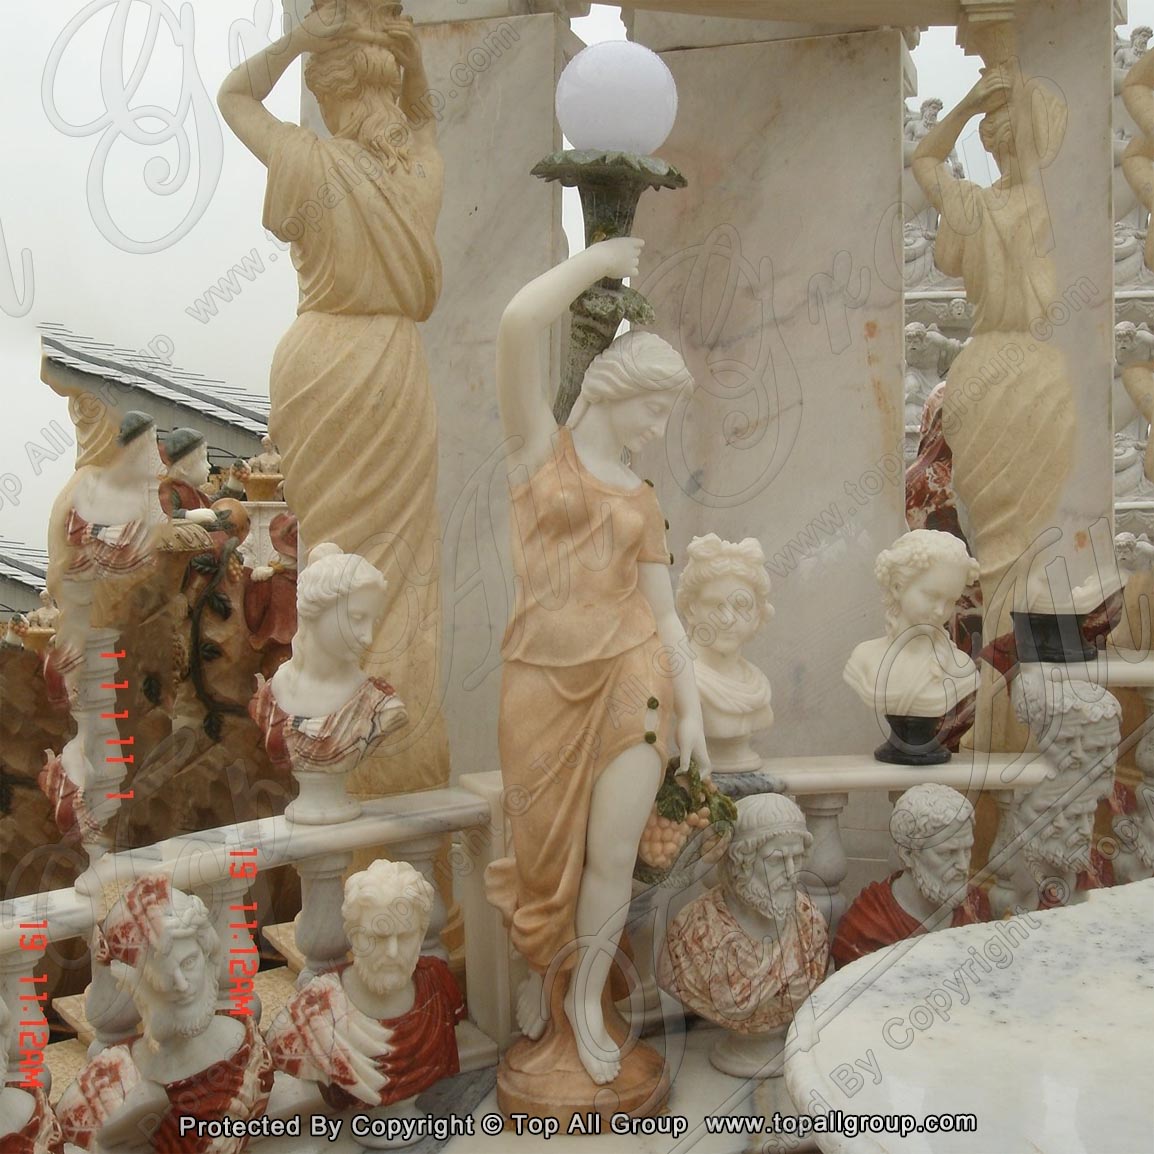 Online Exporter Kashmir White Granite - Classic Western Character Marble Figure Stone Sculpture For Garden Lamp TALP-021 – Top All Group Featured Image